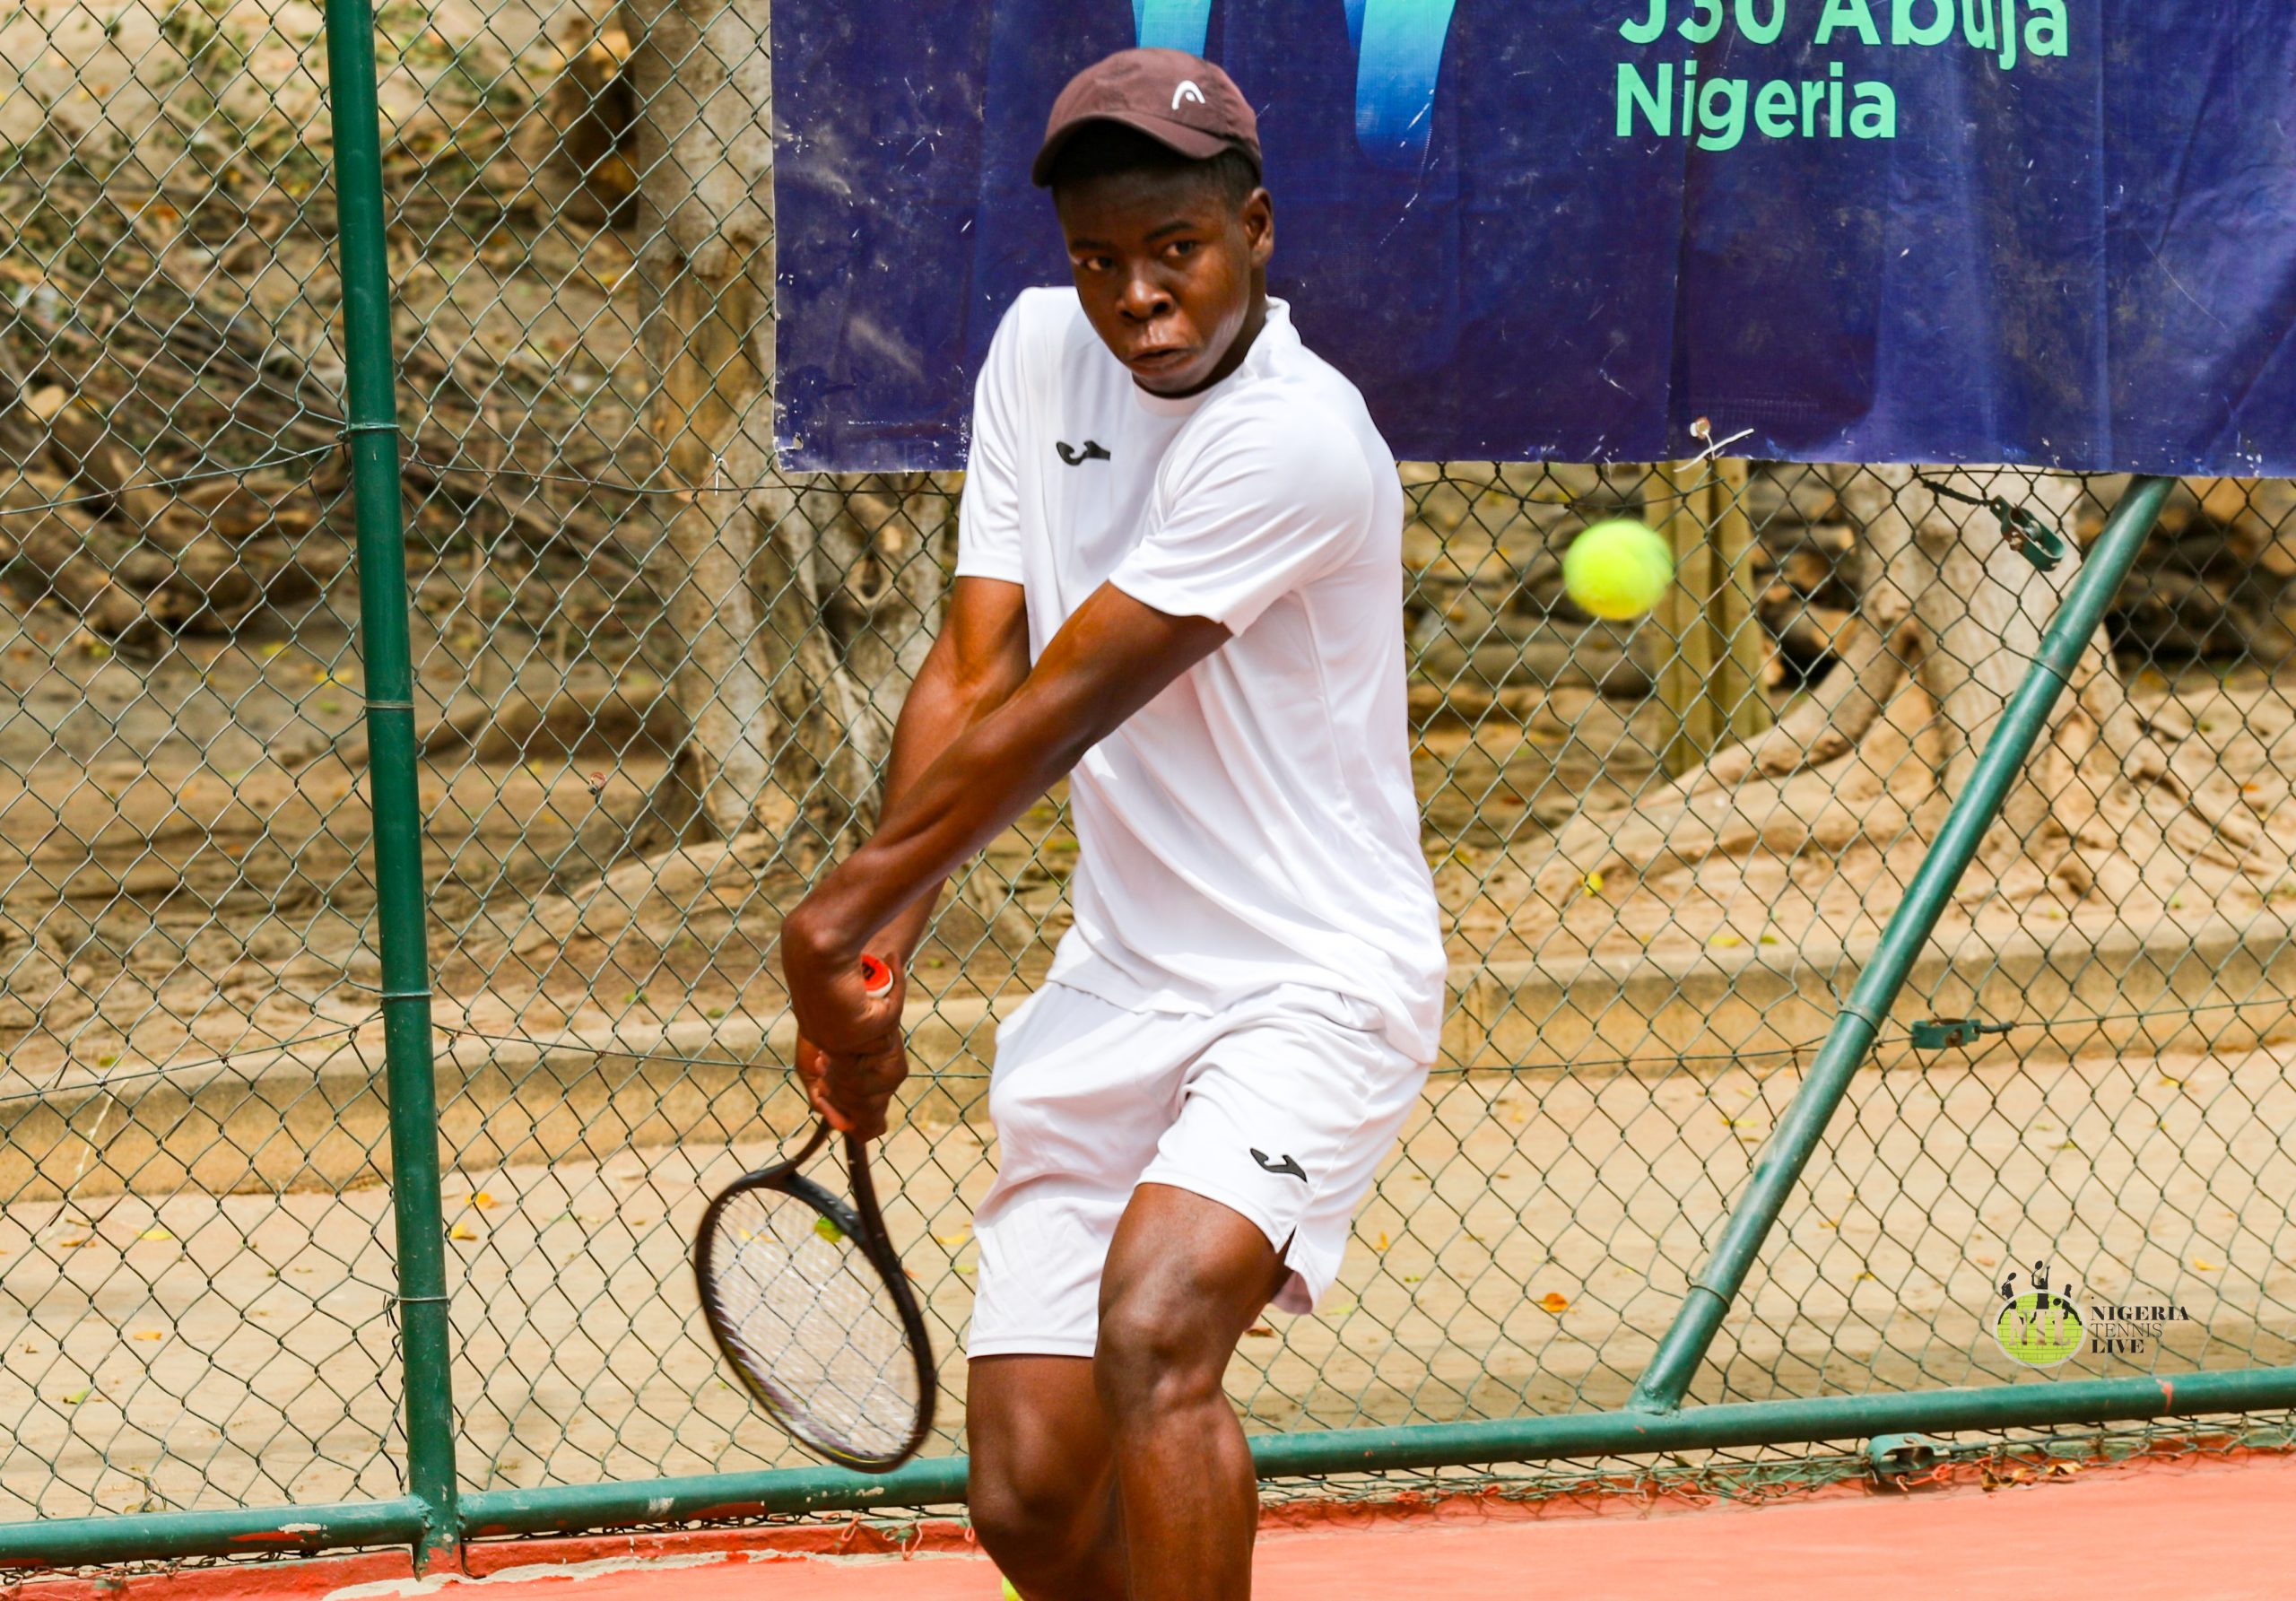 How Ogunsakin Defeated Adeleye To Win His First Ever J30 Title In Abuja